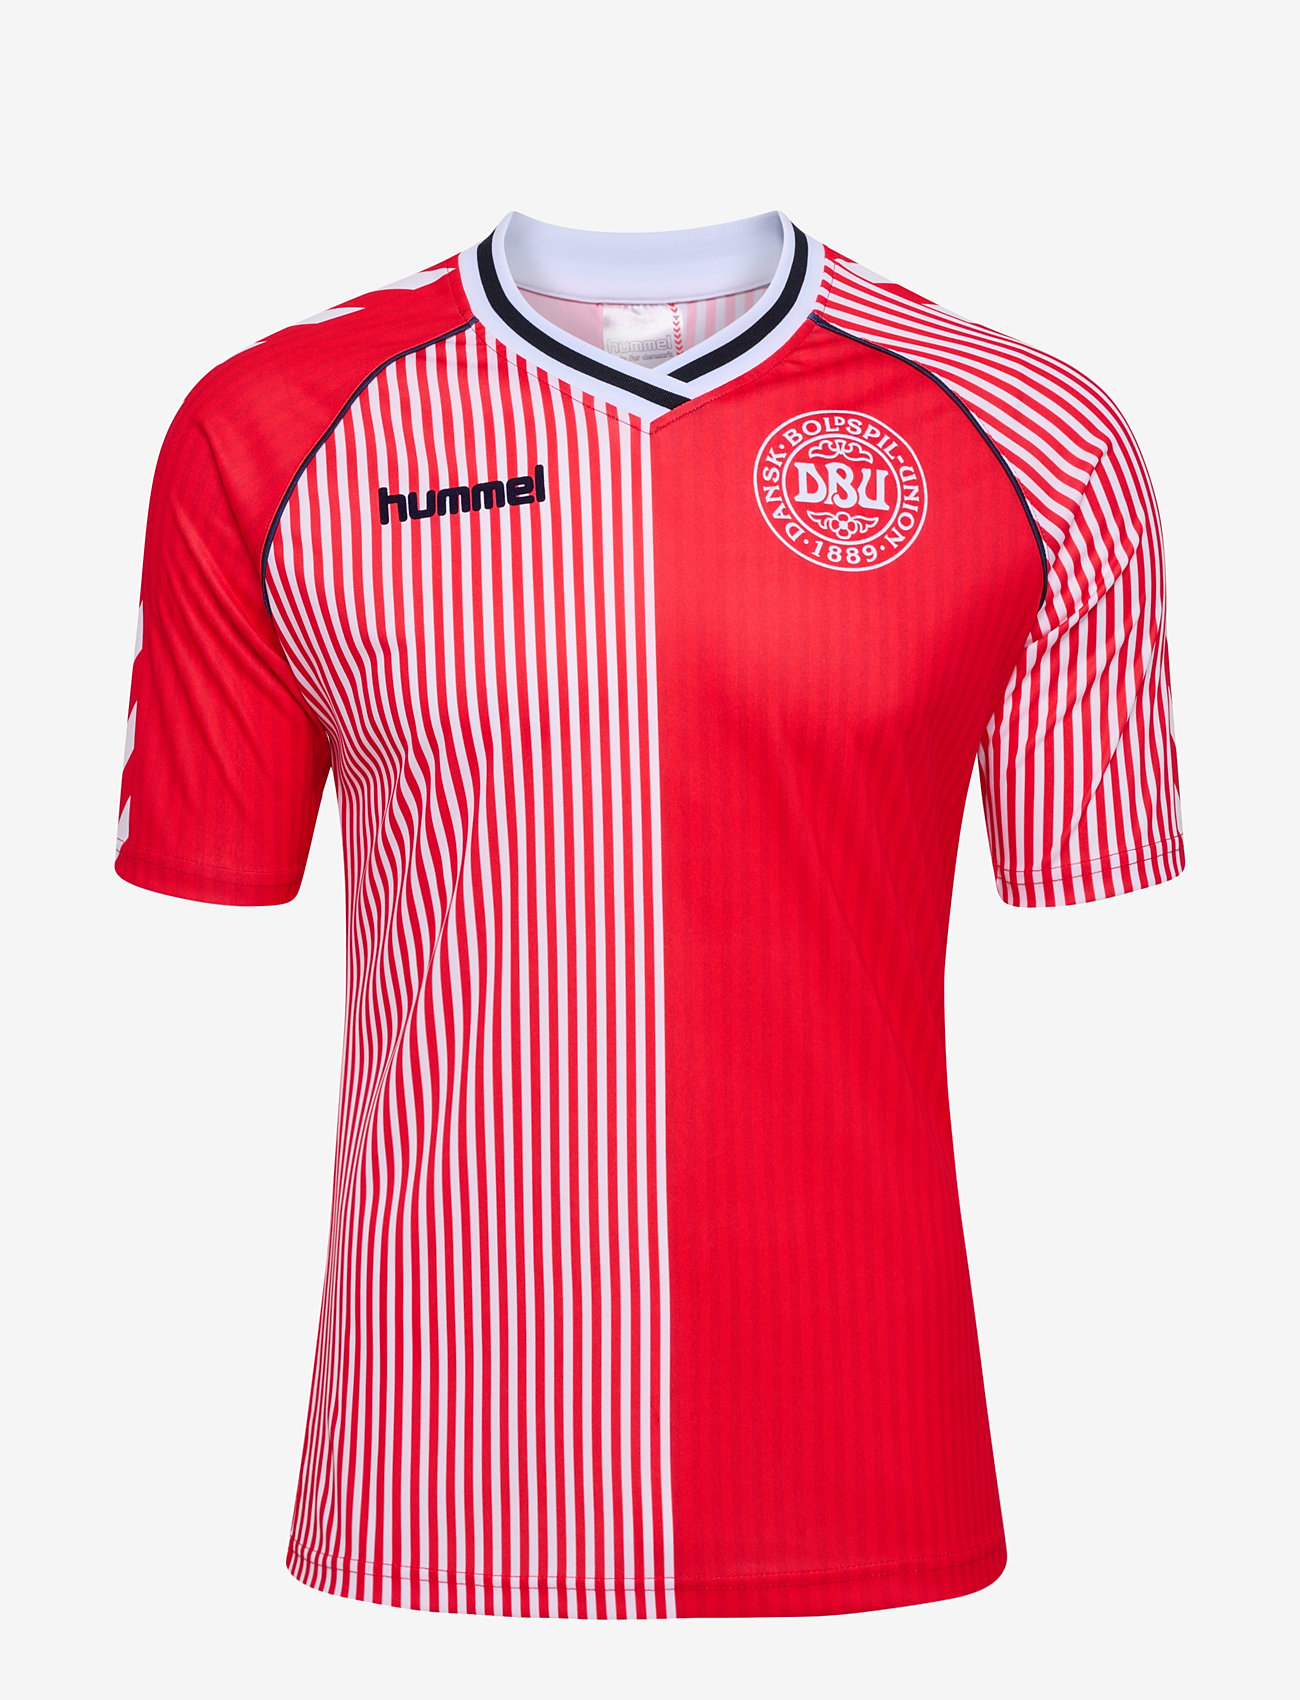 Hummel - DBU 86 REPLICA JERSEY S/S - voetbalshirts - red/white - 0